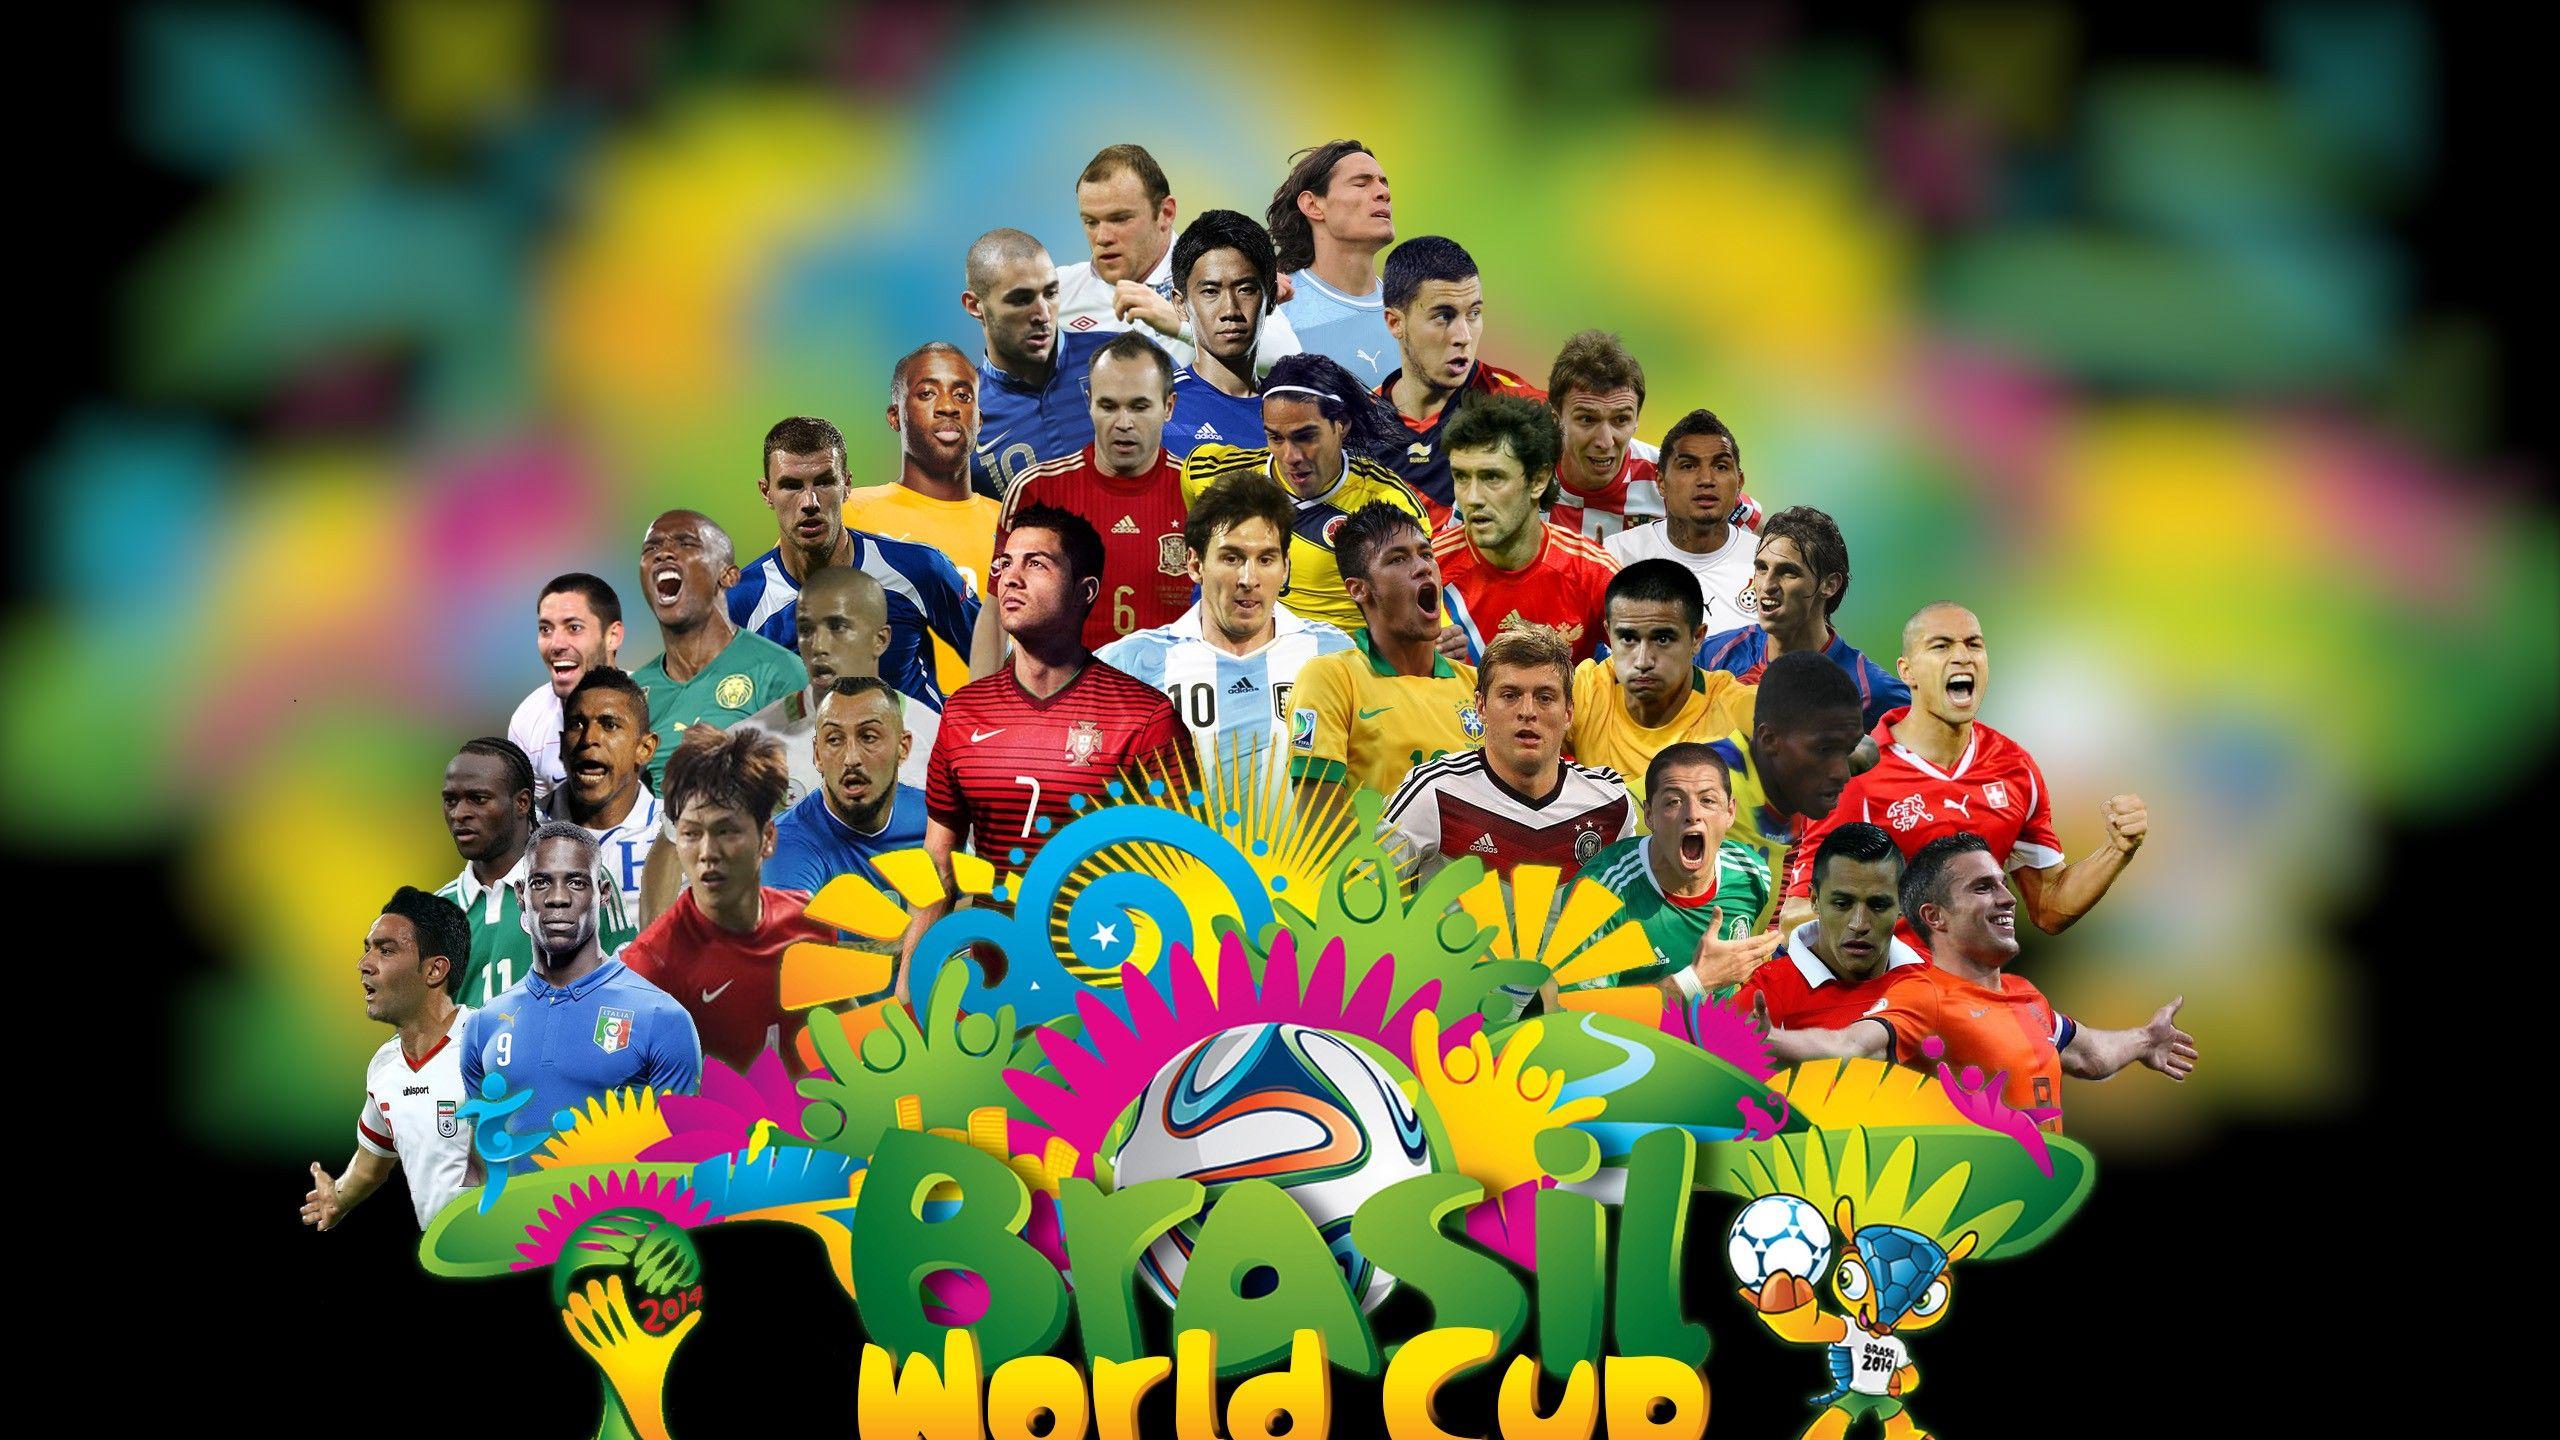 World Cup Wallpapers - Wallpaper Cave